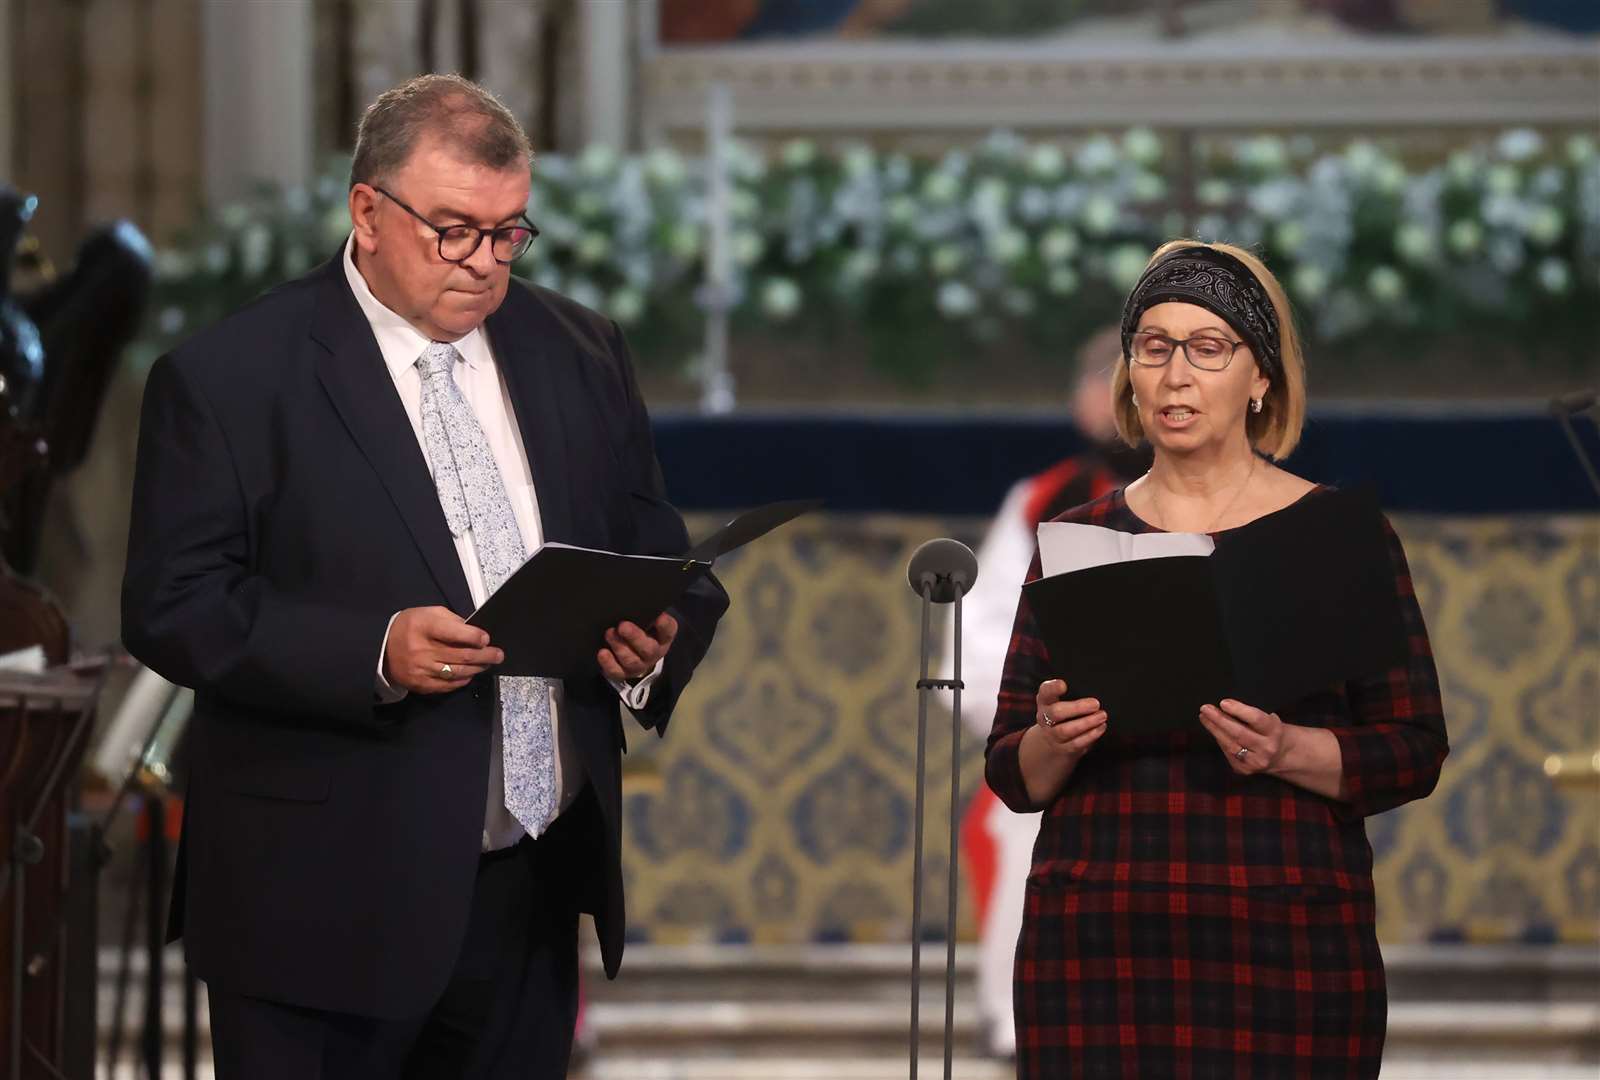 Sean Coll and Linda Irvine speaking during a service to mark the centenary of Northern Ireland at St Patrick’s Cathedral in Armagh (Liam McBurney/PA)